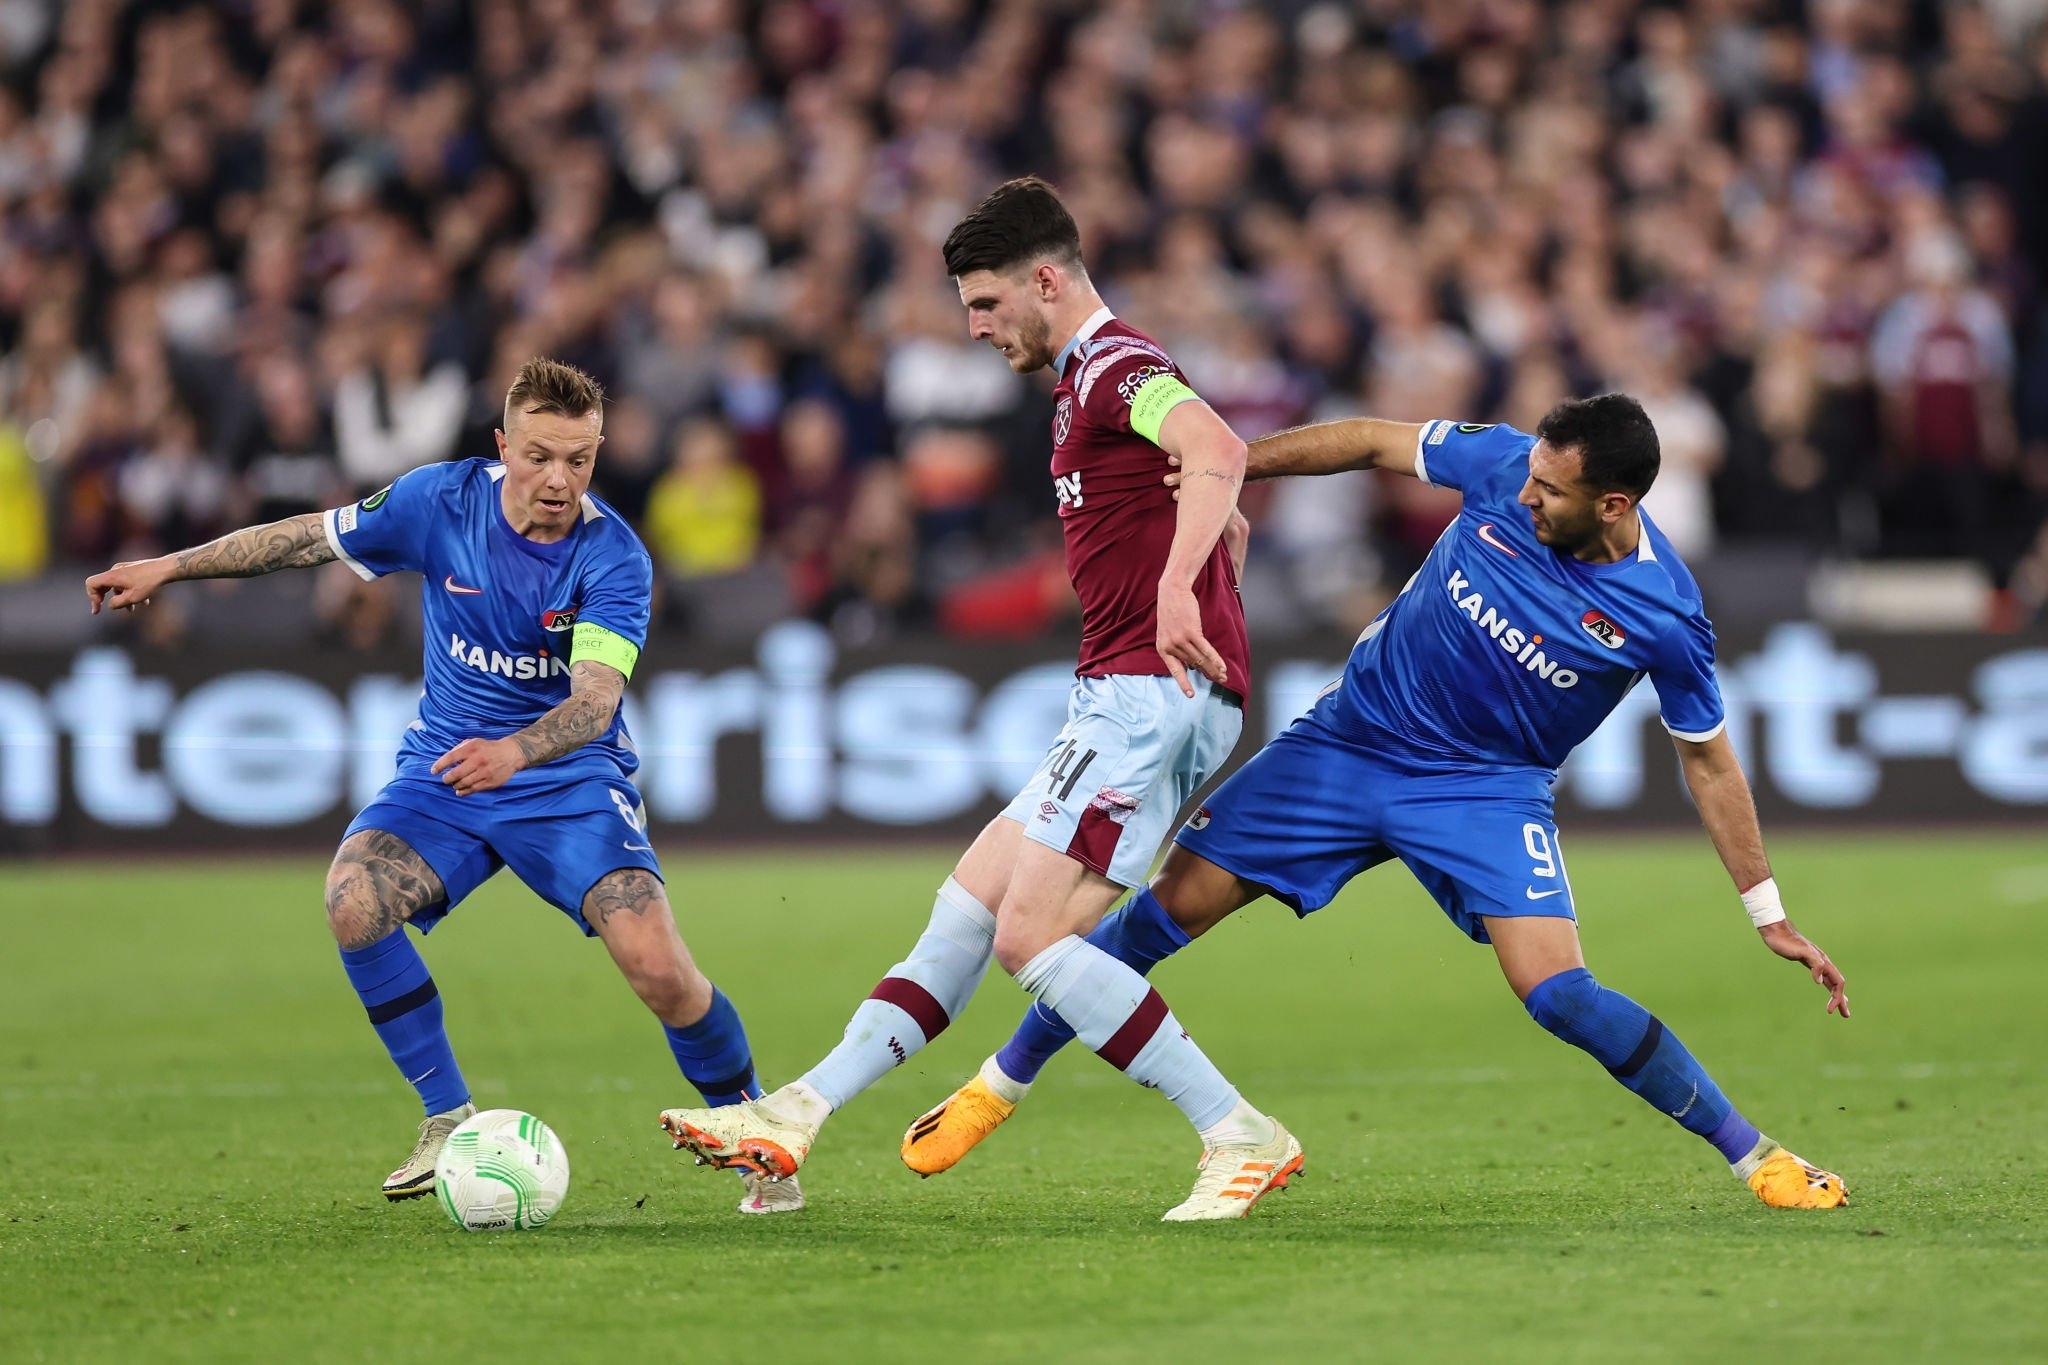 West Ham cap Declan Rice transfer to Bayern Munich deal nearly finalised, Arsenal, Premier League clubs Manchester United and Chelsea to bid